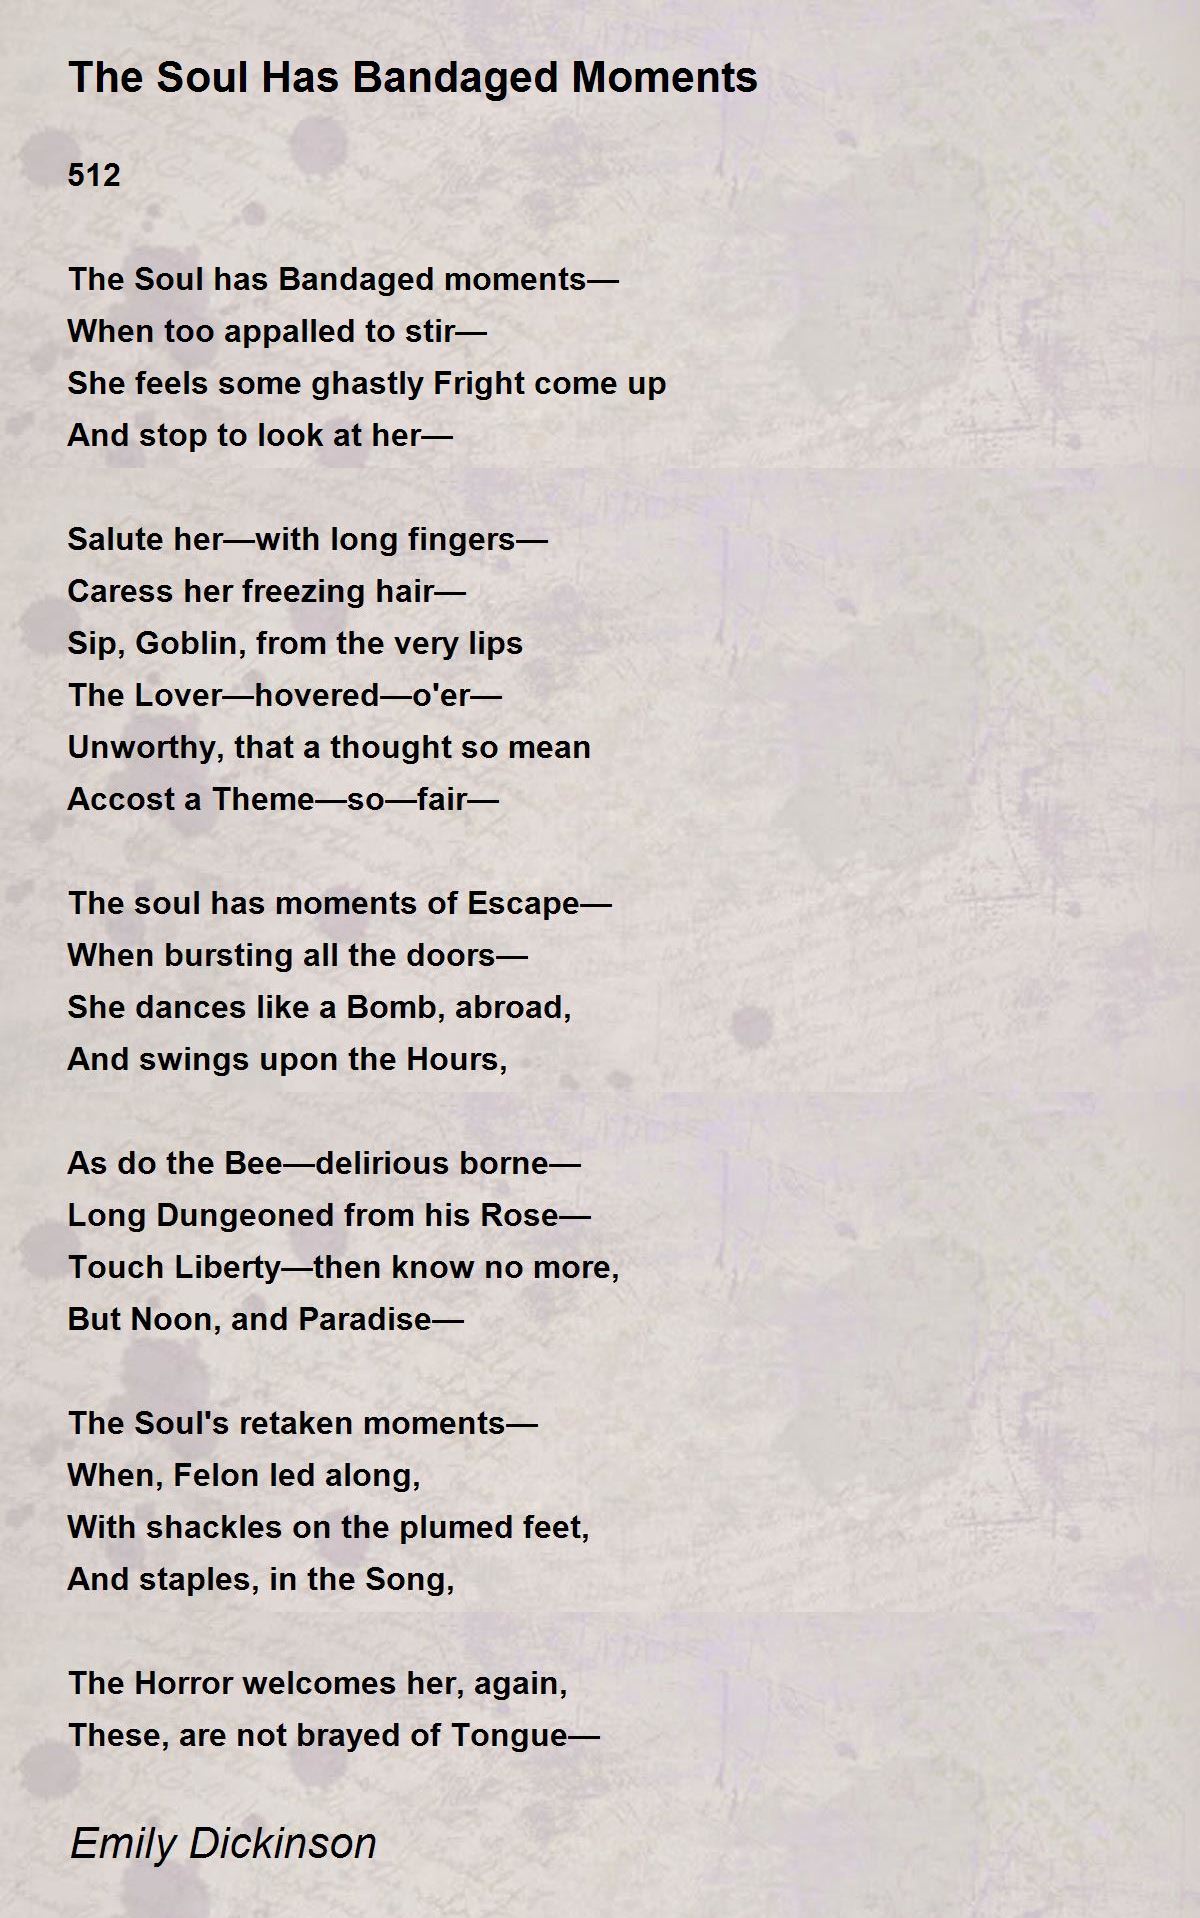 The Soul Has Bandaged Moments Poem by Emily Dickinson 